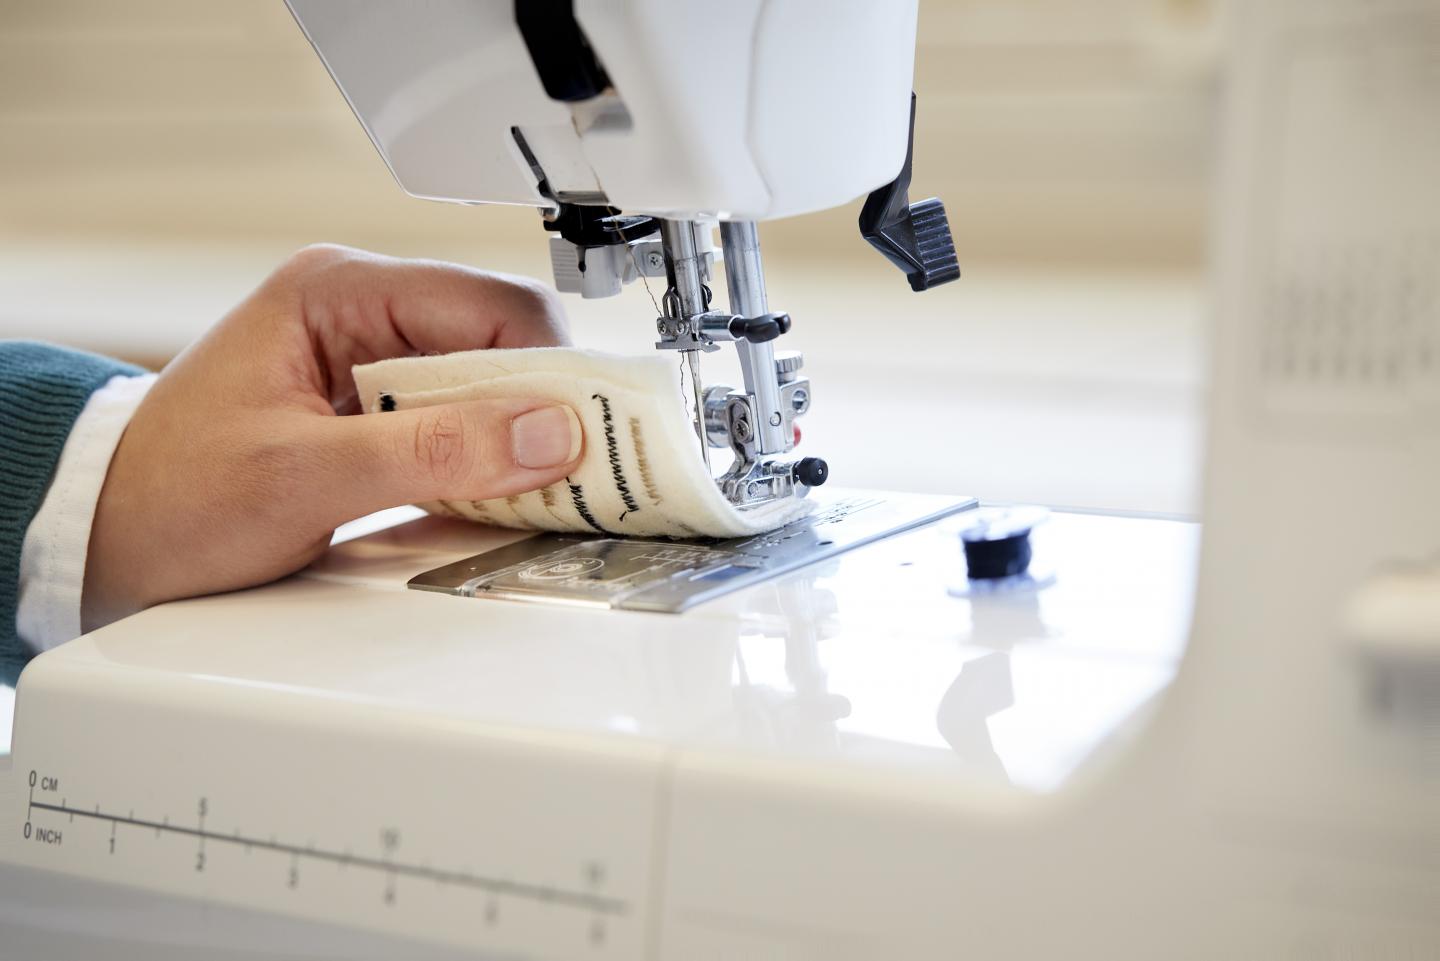 Sewing Thermoelectronics into Regular Textile